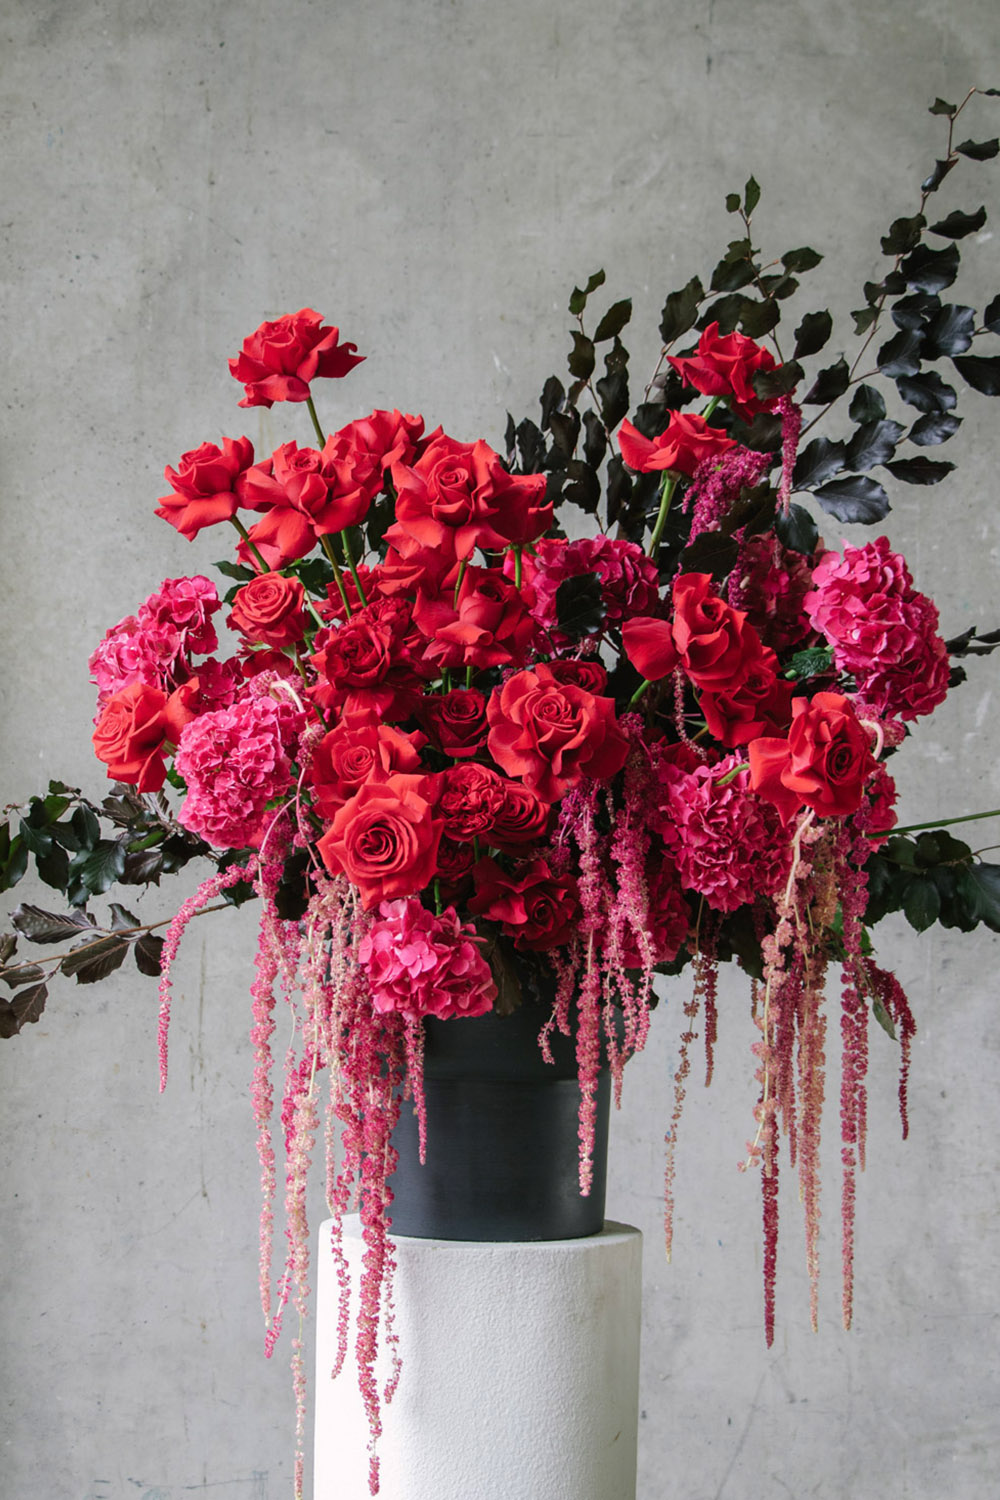 Luscious Floral Arrangement with Red Roses and Foliage by Flowers Vasette